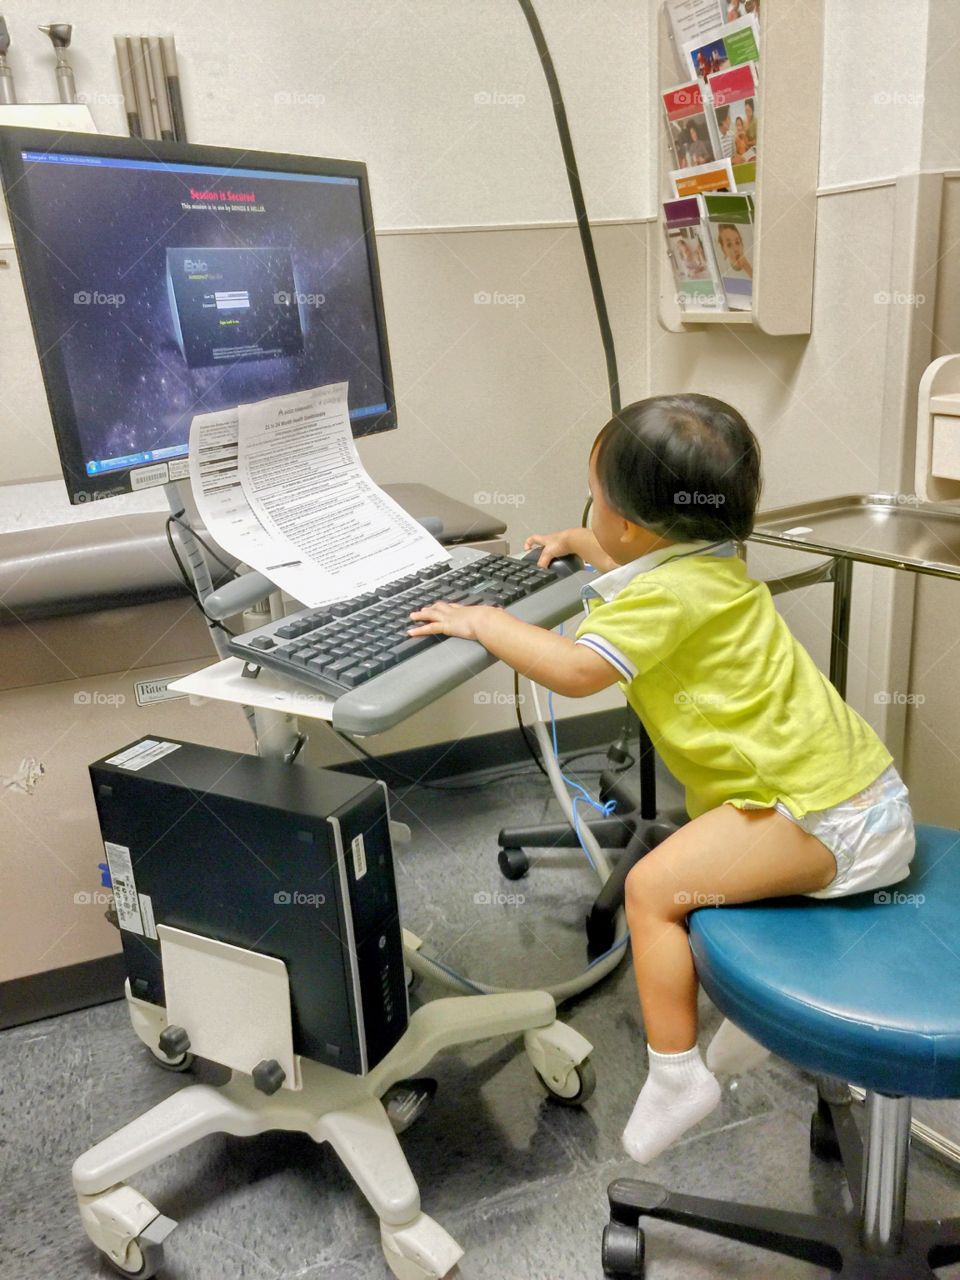 Baby and computer. Visiting the yearly checkup from his doctor. 